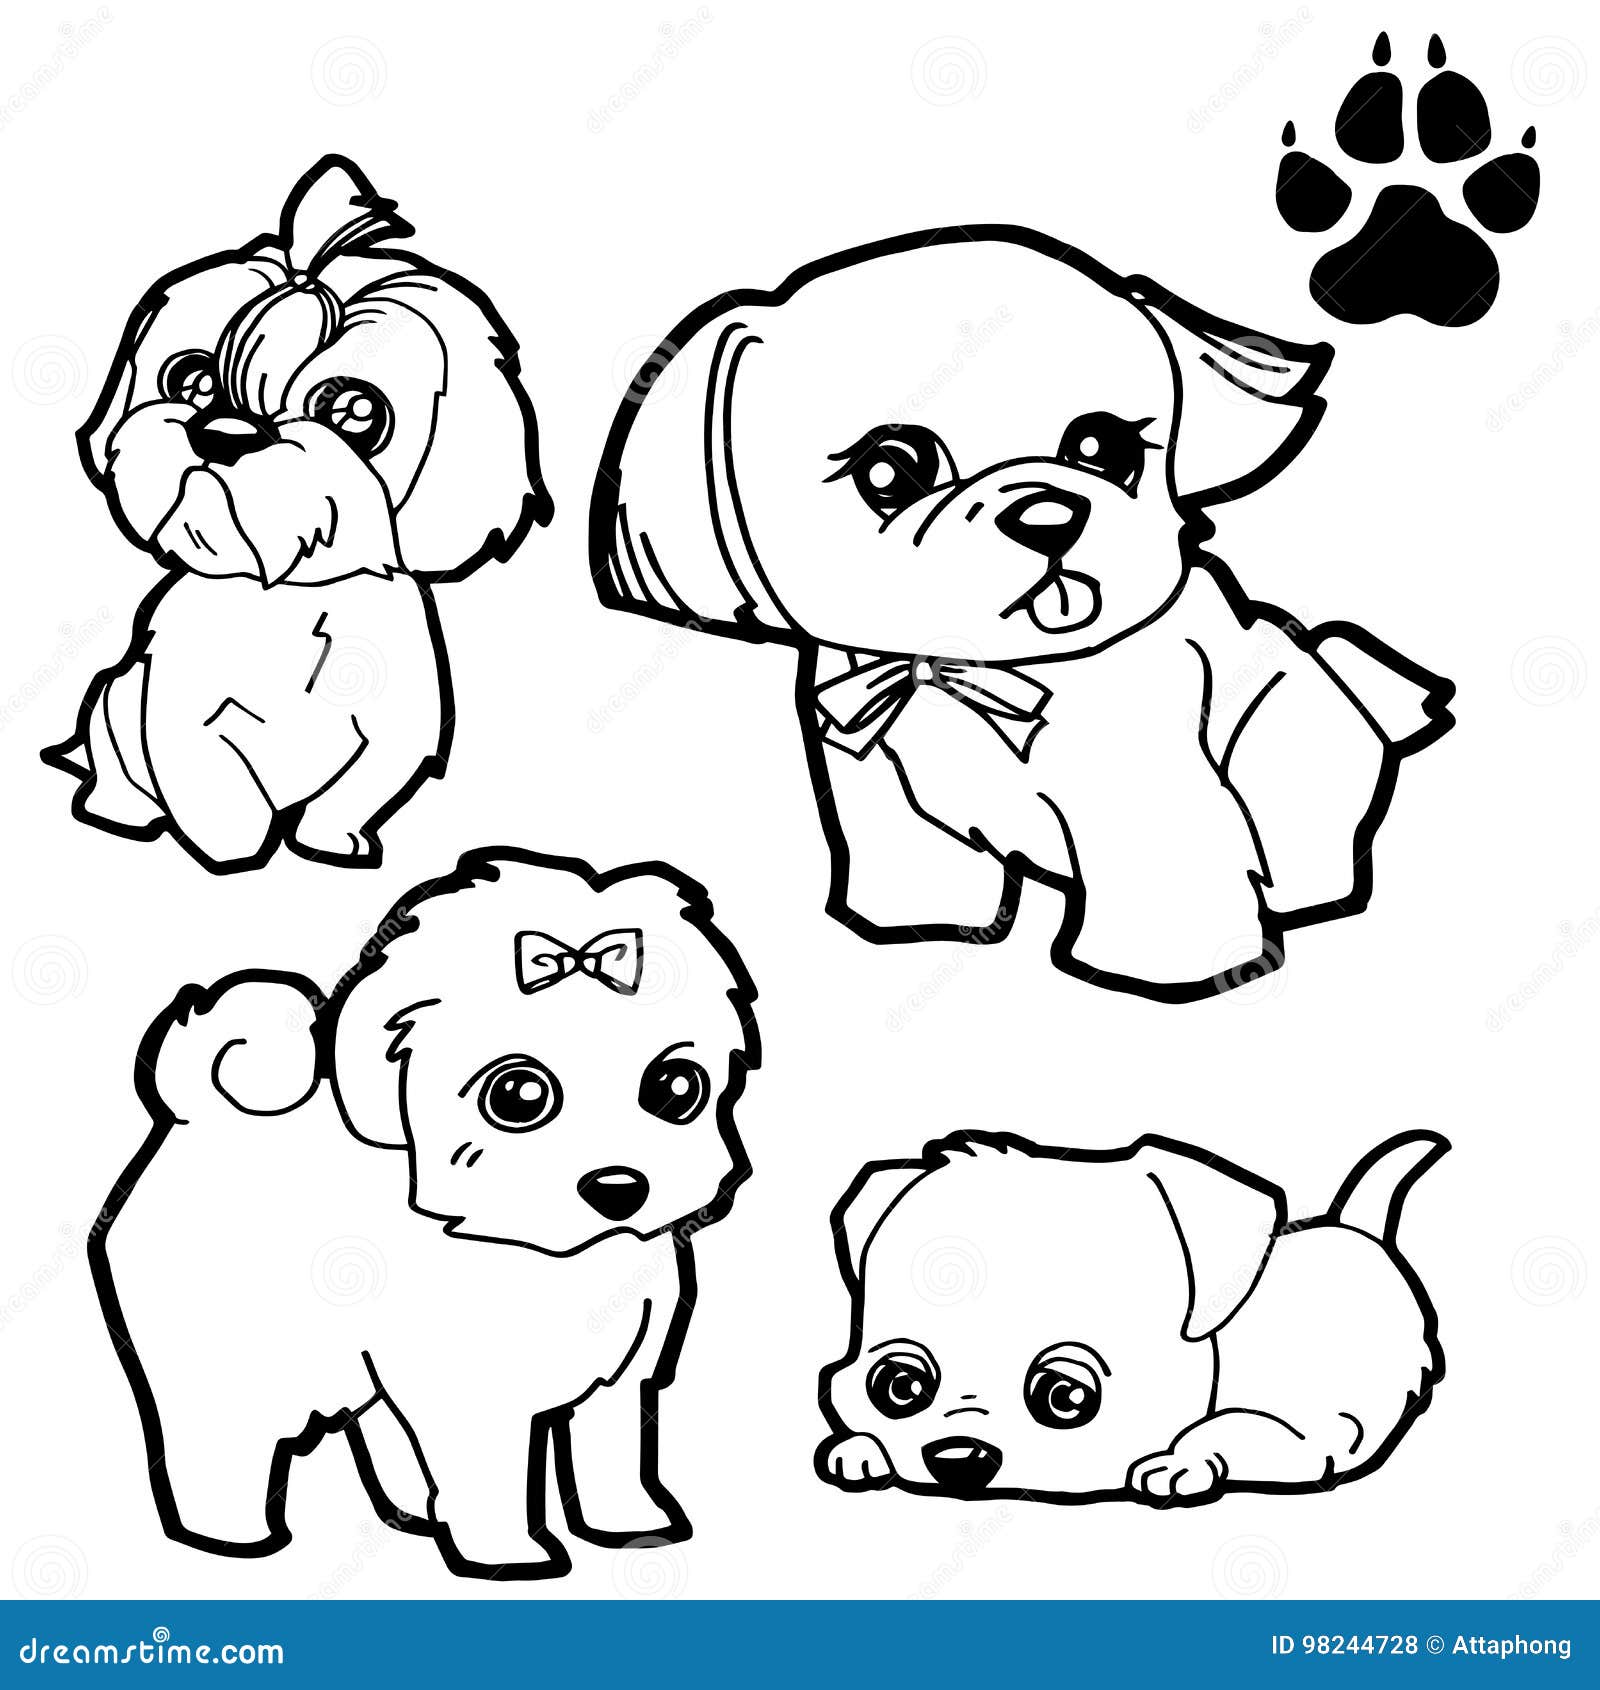 Dog Cartoon And Dog Paw Print Coloring Book On White ...